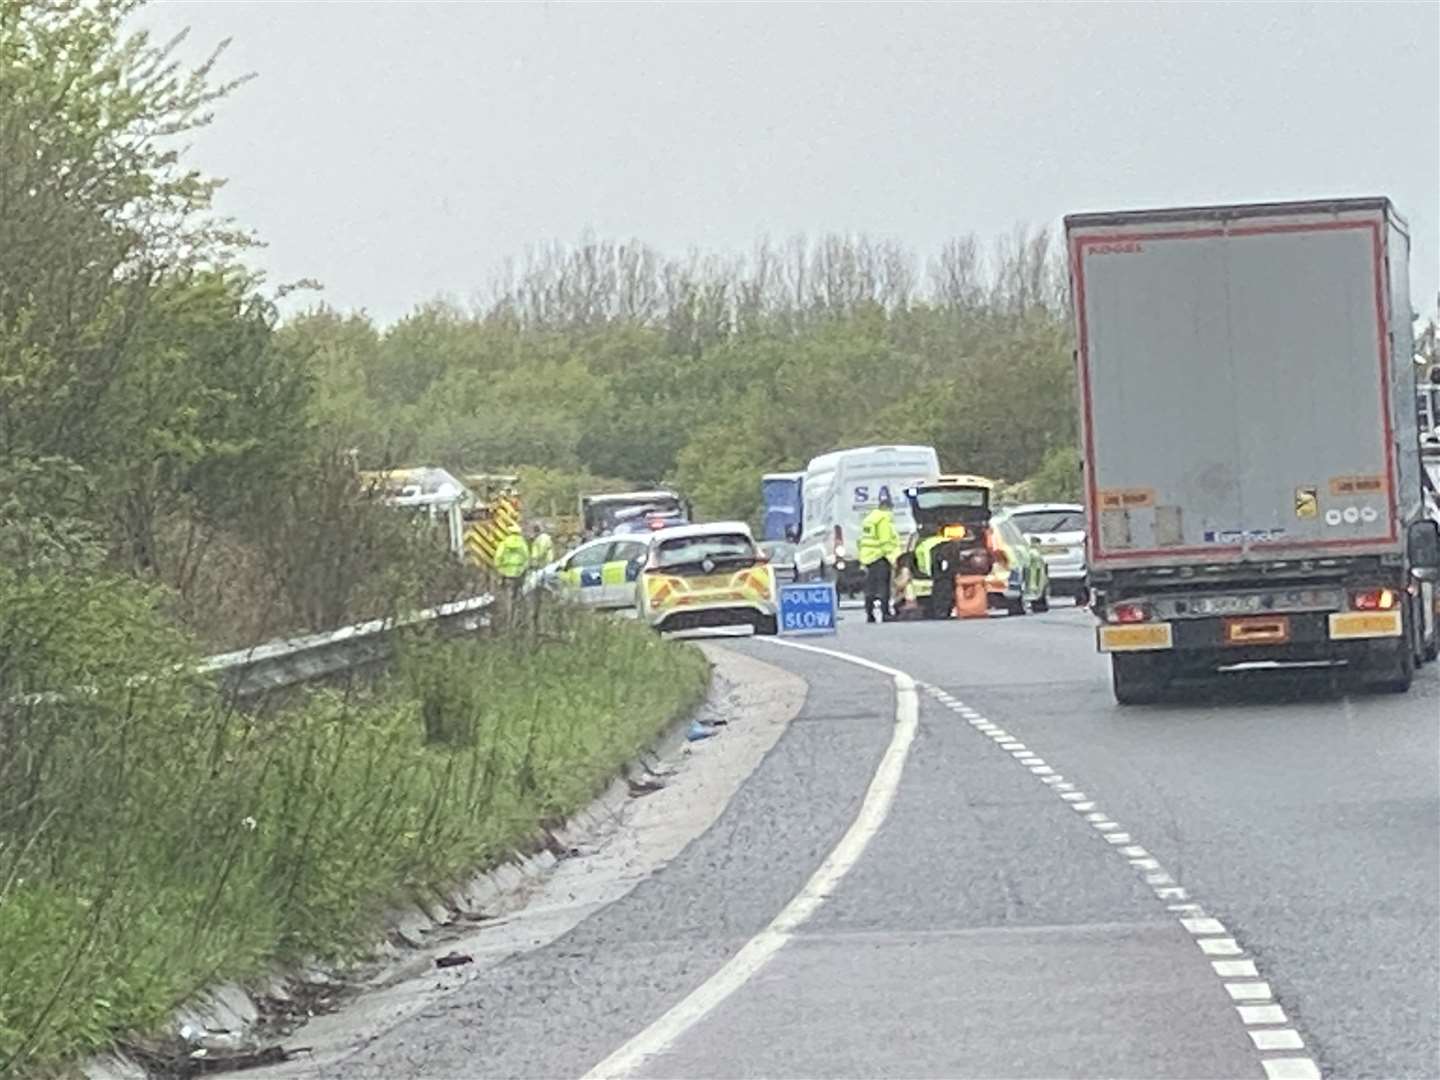 The A20 is currently closed. Photo: Steve Salter